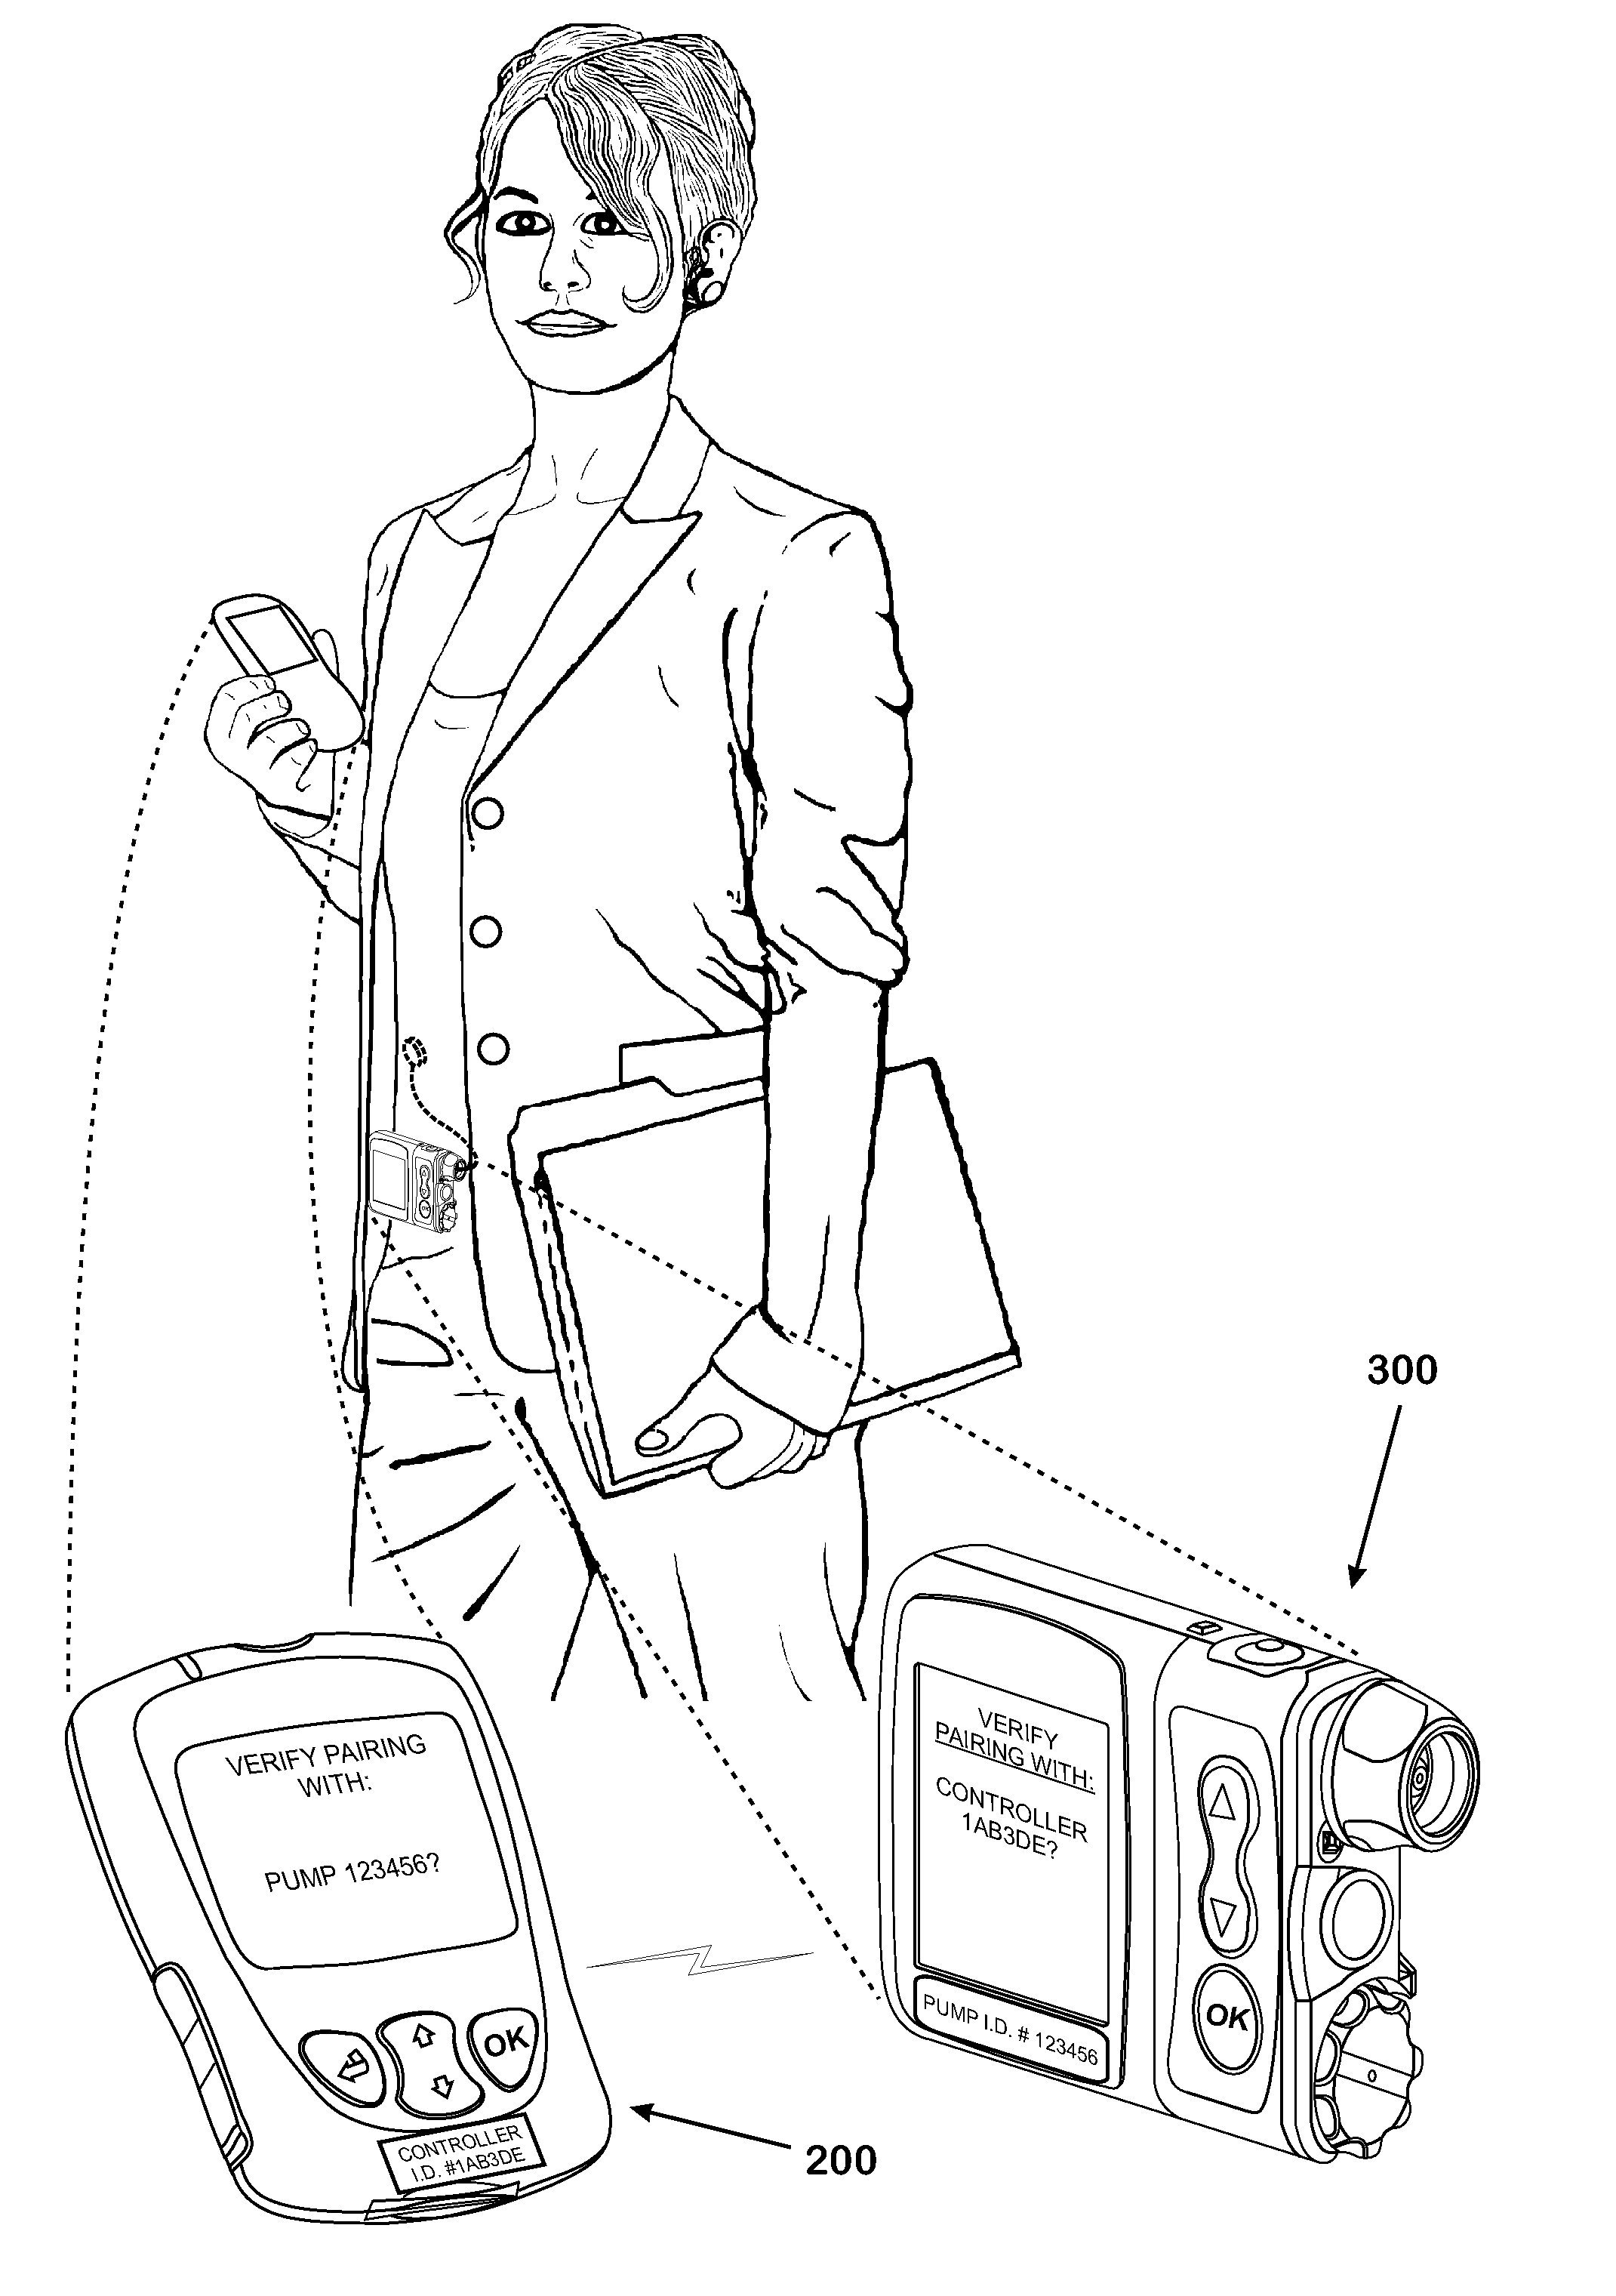 Method of operating a medical device and at least a remote controller for such medical device